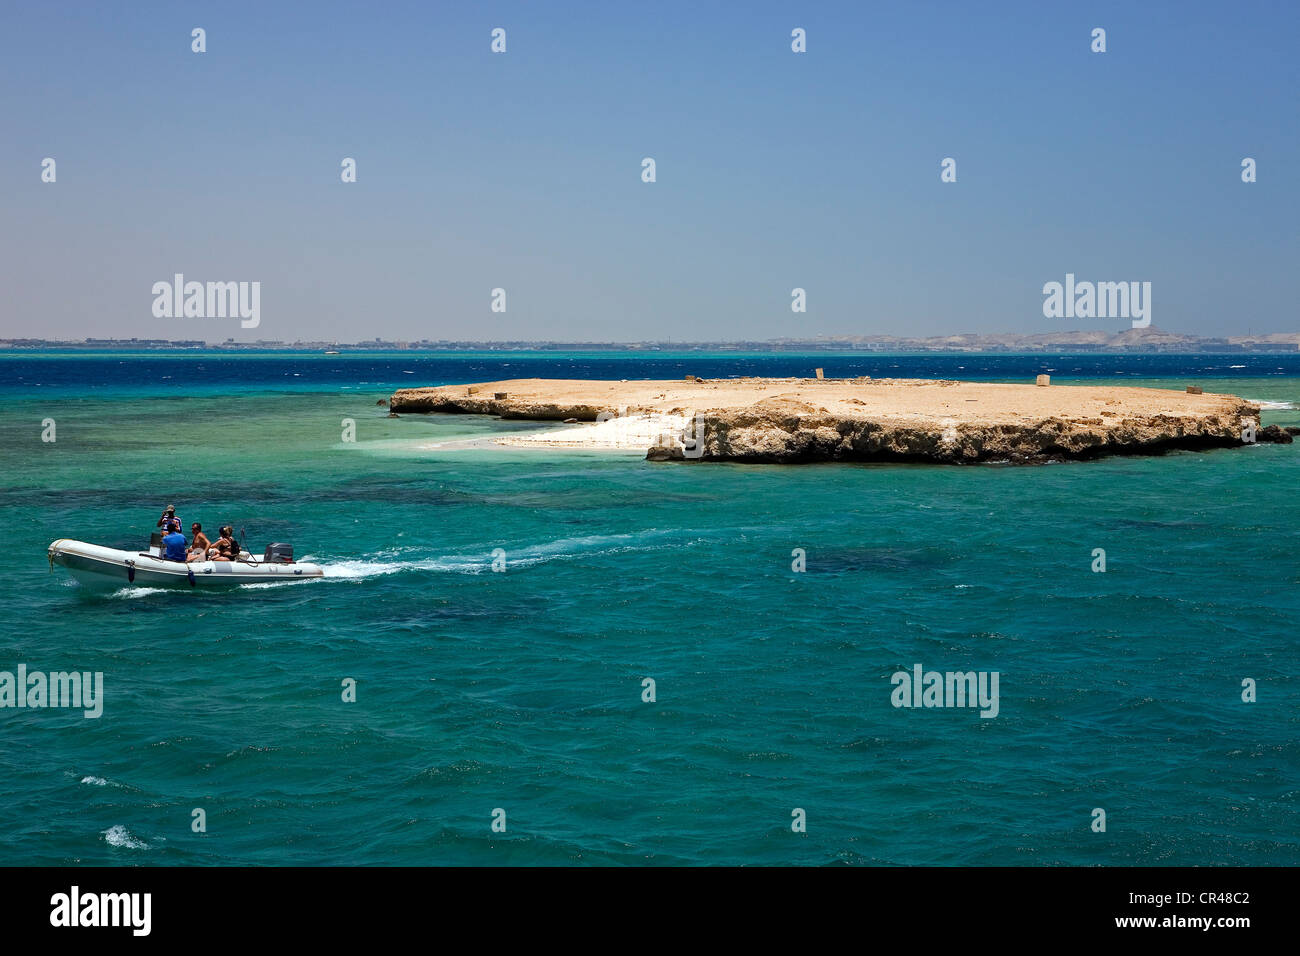 Egypt, Red Sea, Hurghada, inflatable dinghy off the coasts Stock Photo